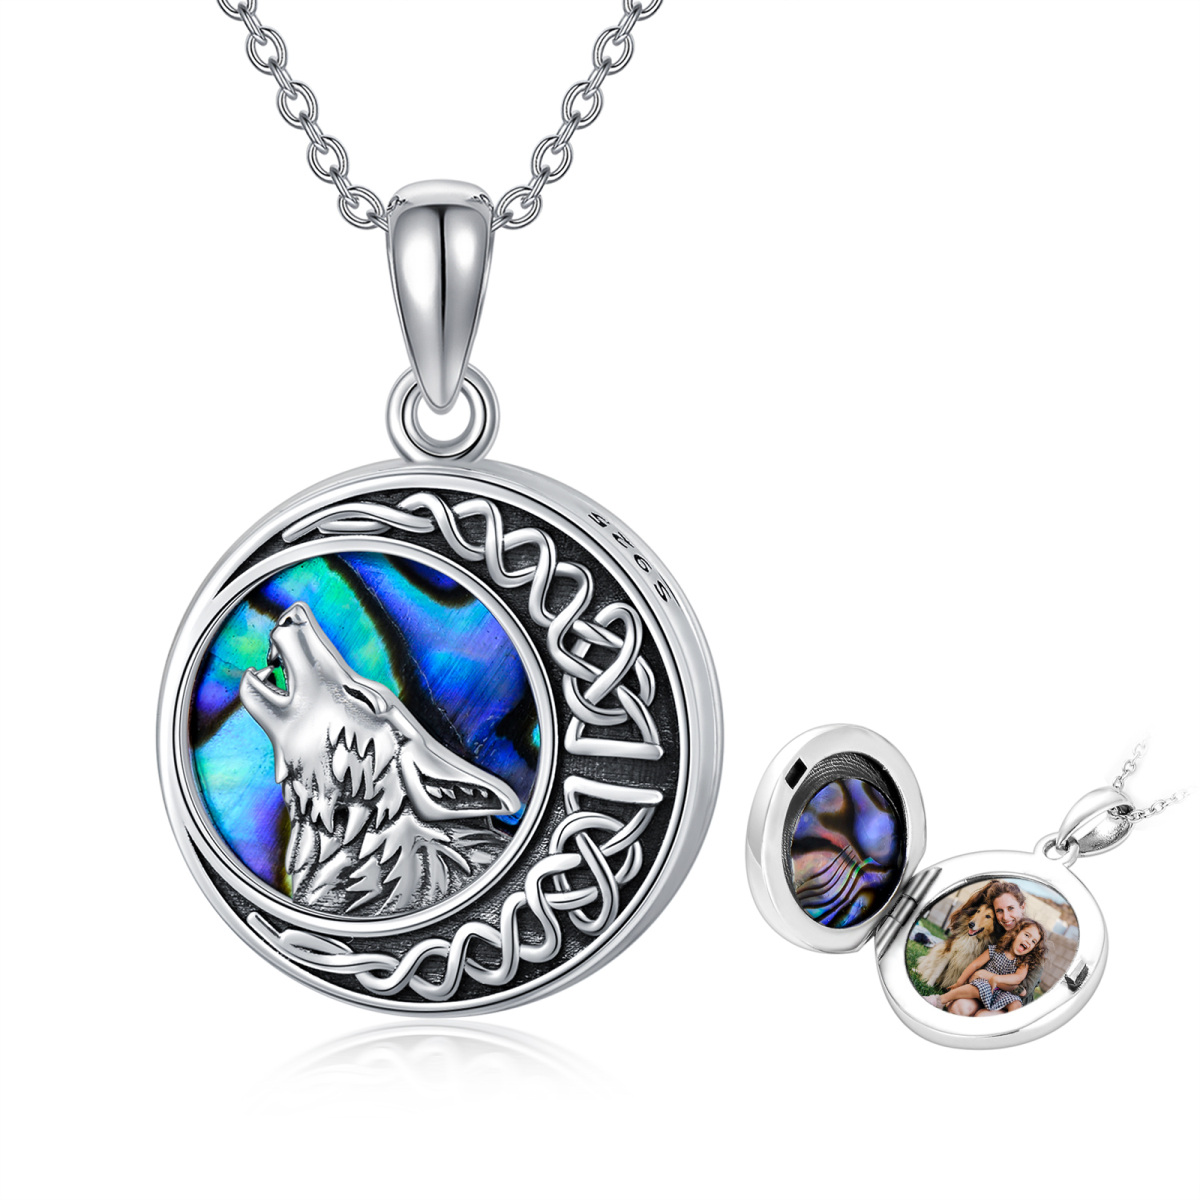 Sterling Silver Abalone Shellfish Wolf & Celtic Knot & Moon Circular Shaped Personalized Photo Locket Necklace with Engraved Word-1